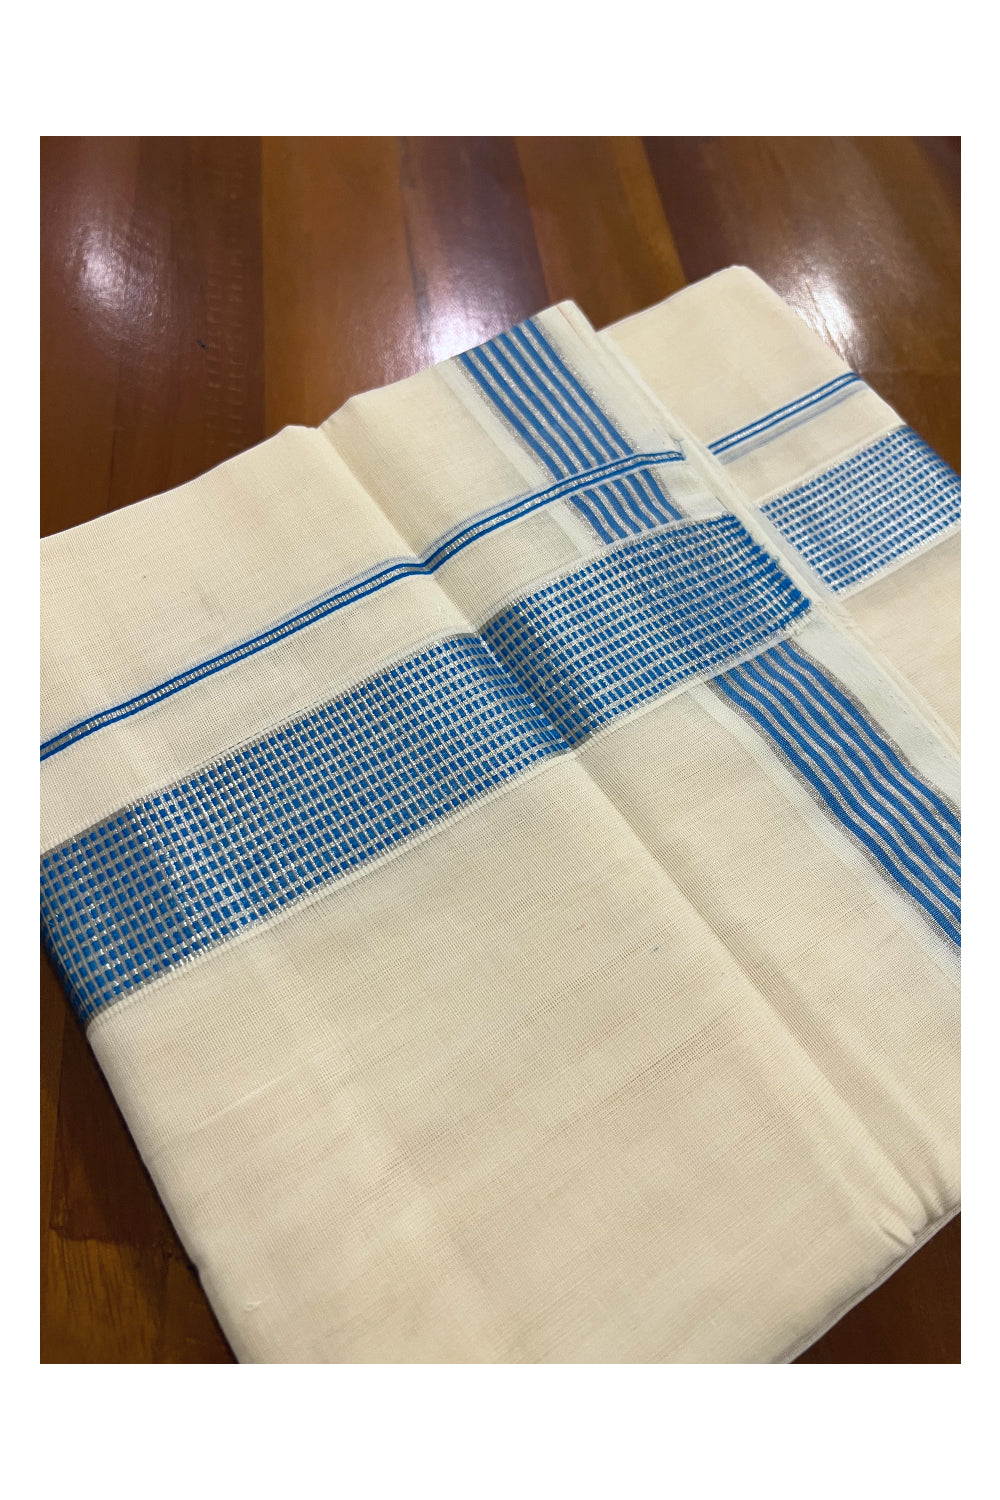 Southloom Kuthampully Handloom Pure Cotton Mundu with Silver Kasavu and Blue Border (South Indian Dhoti)